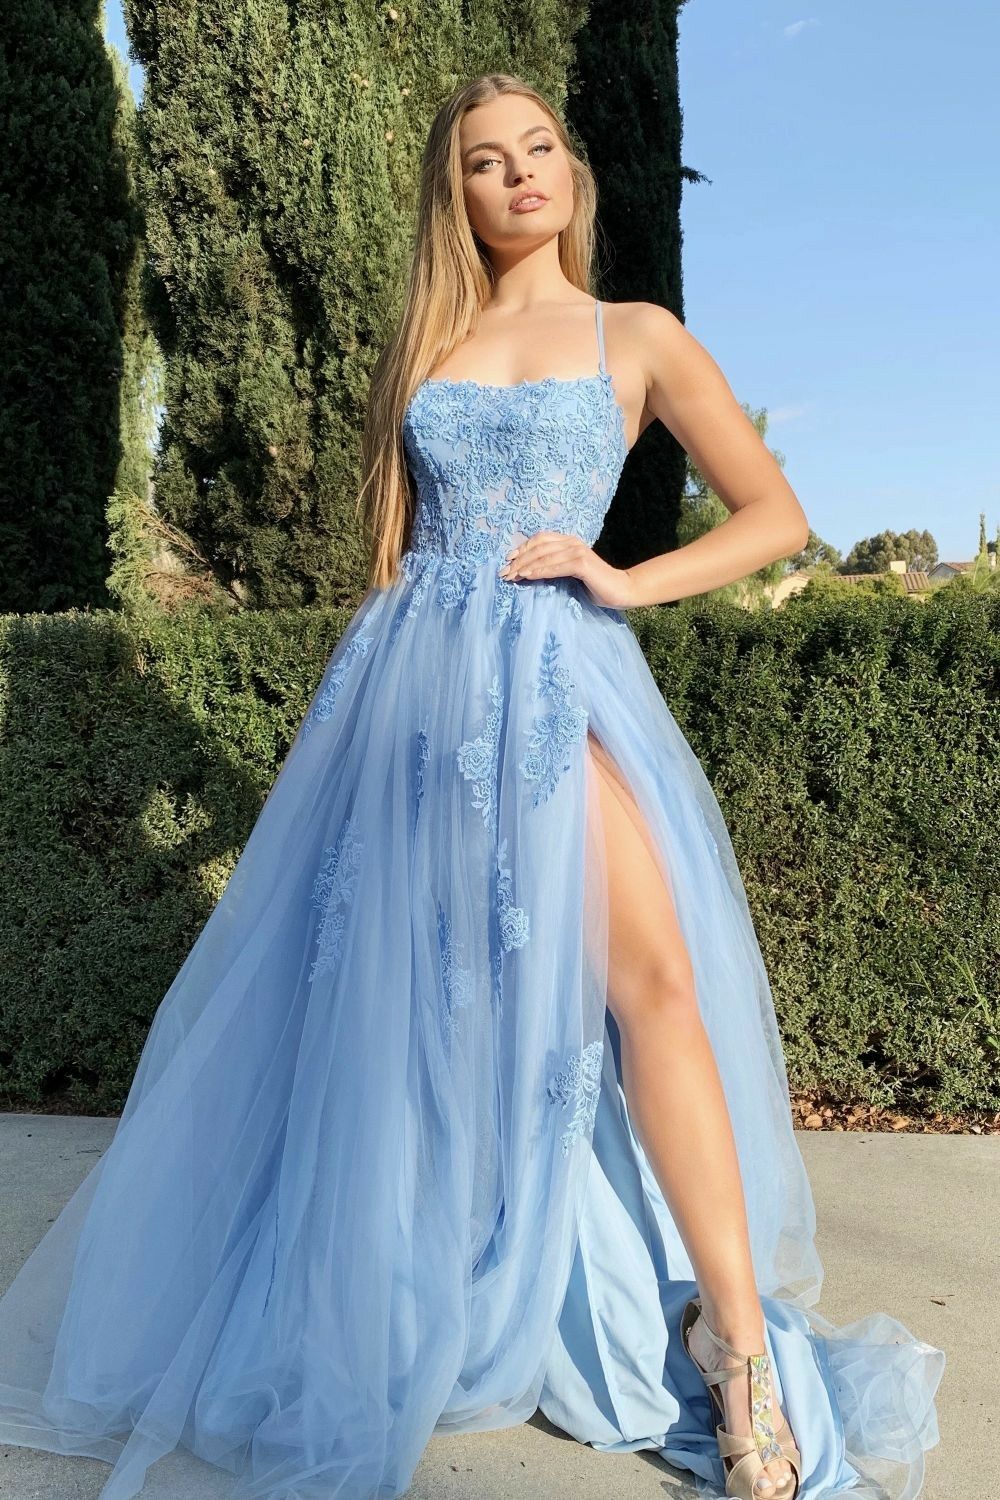 LTP0023,Sky Blue Prom Dress with High Slit, Homecoming Dress ,Winter Formal Dress,Pageant Dance Dresses,Back To School Party Gown